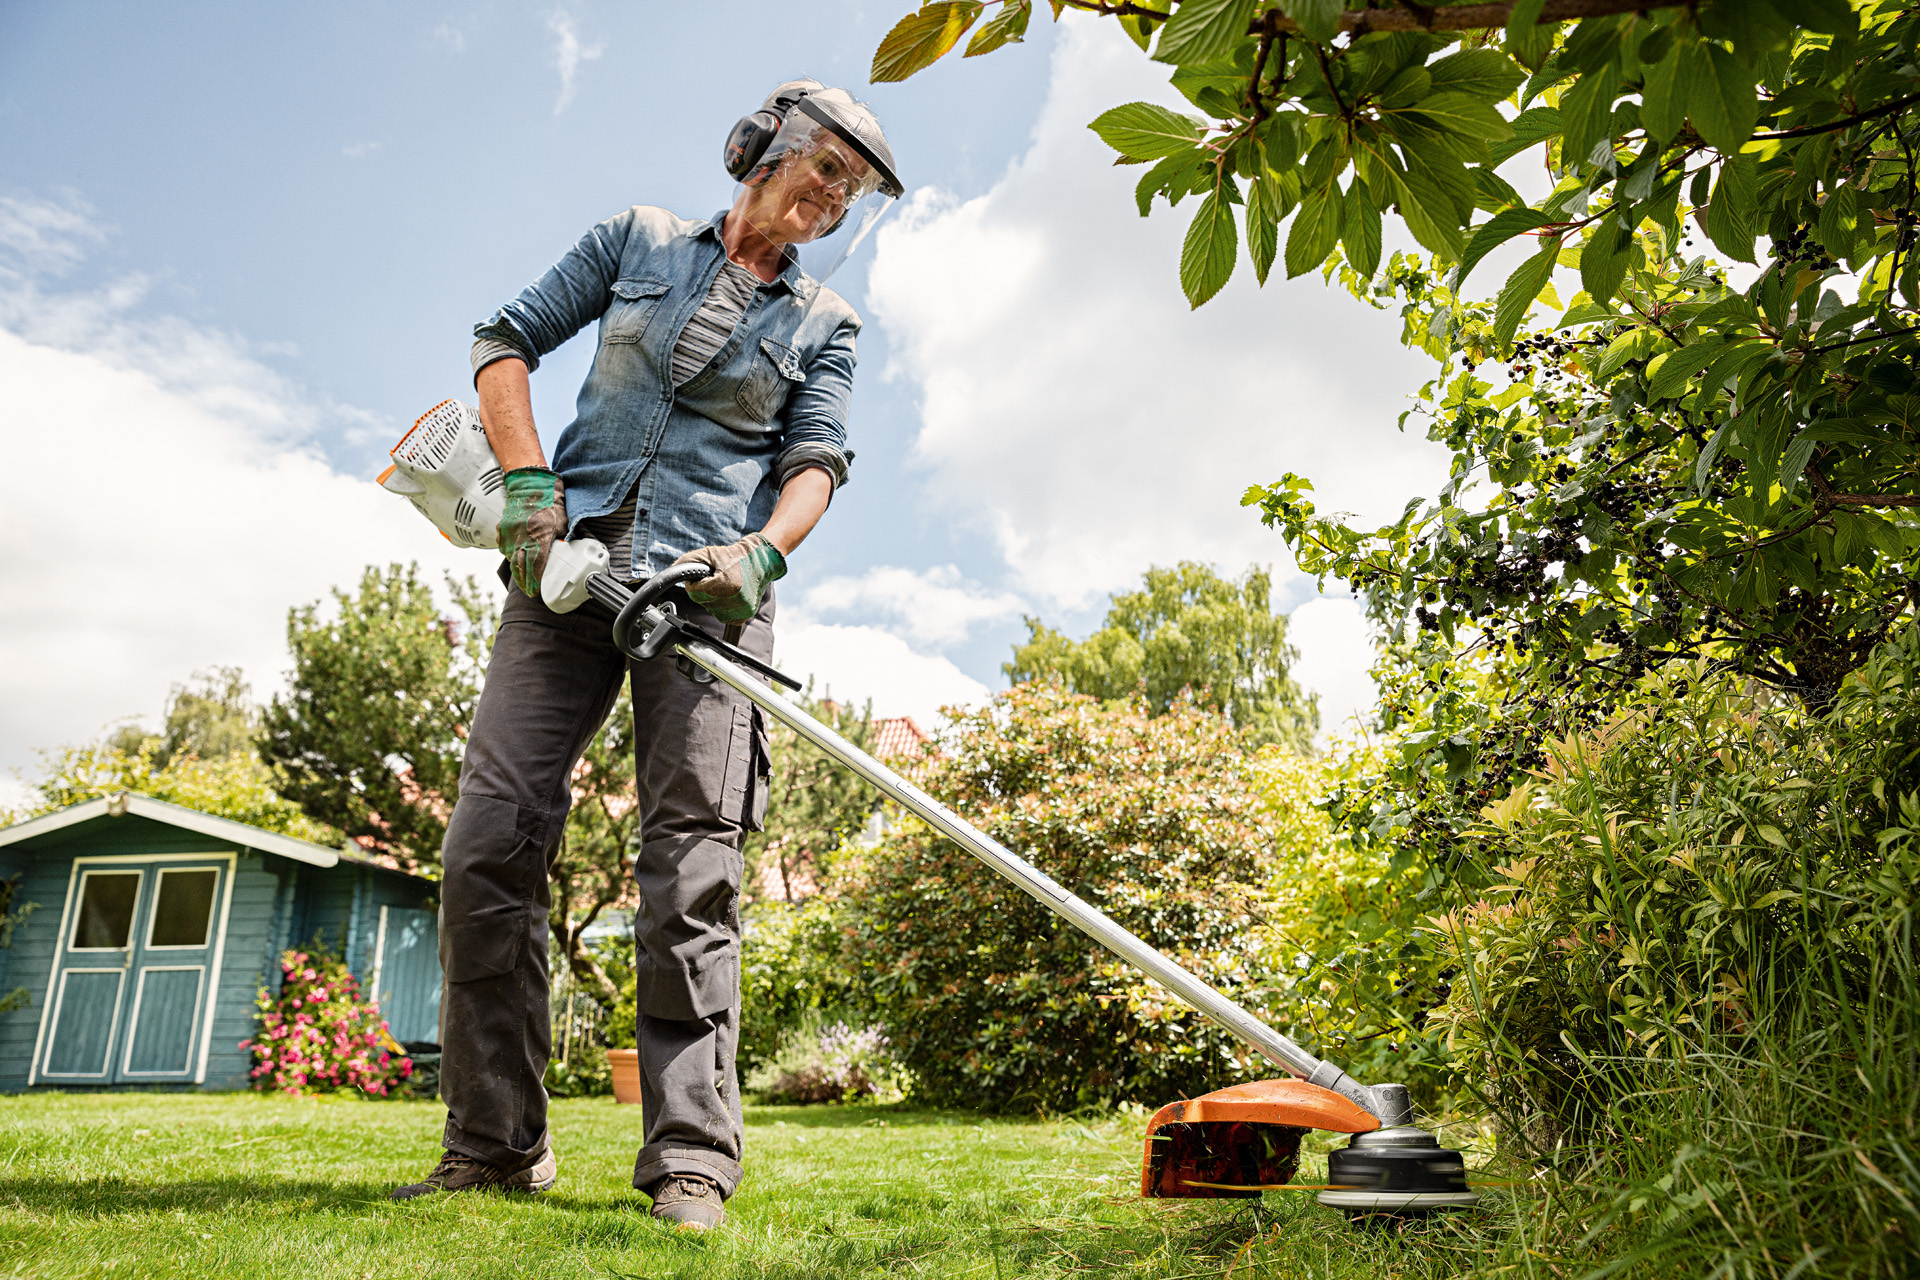 A woman wearing face and ear protection using a STIHL FS 56 R petrol grass trimmer in a garden with shrubs and lawn